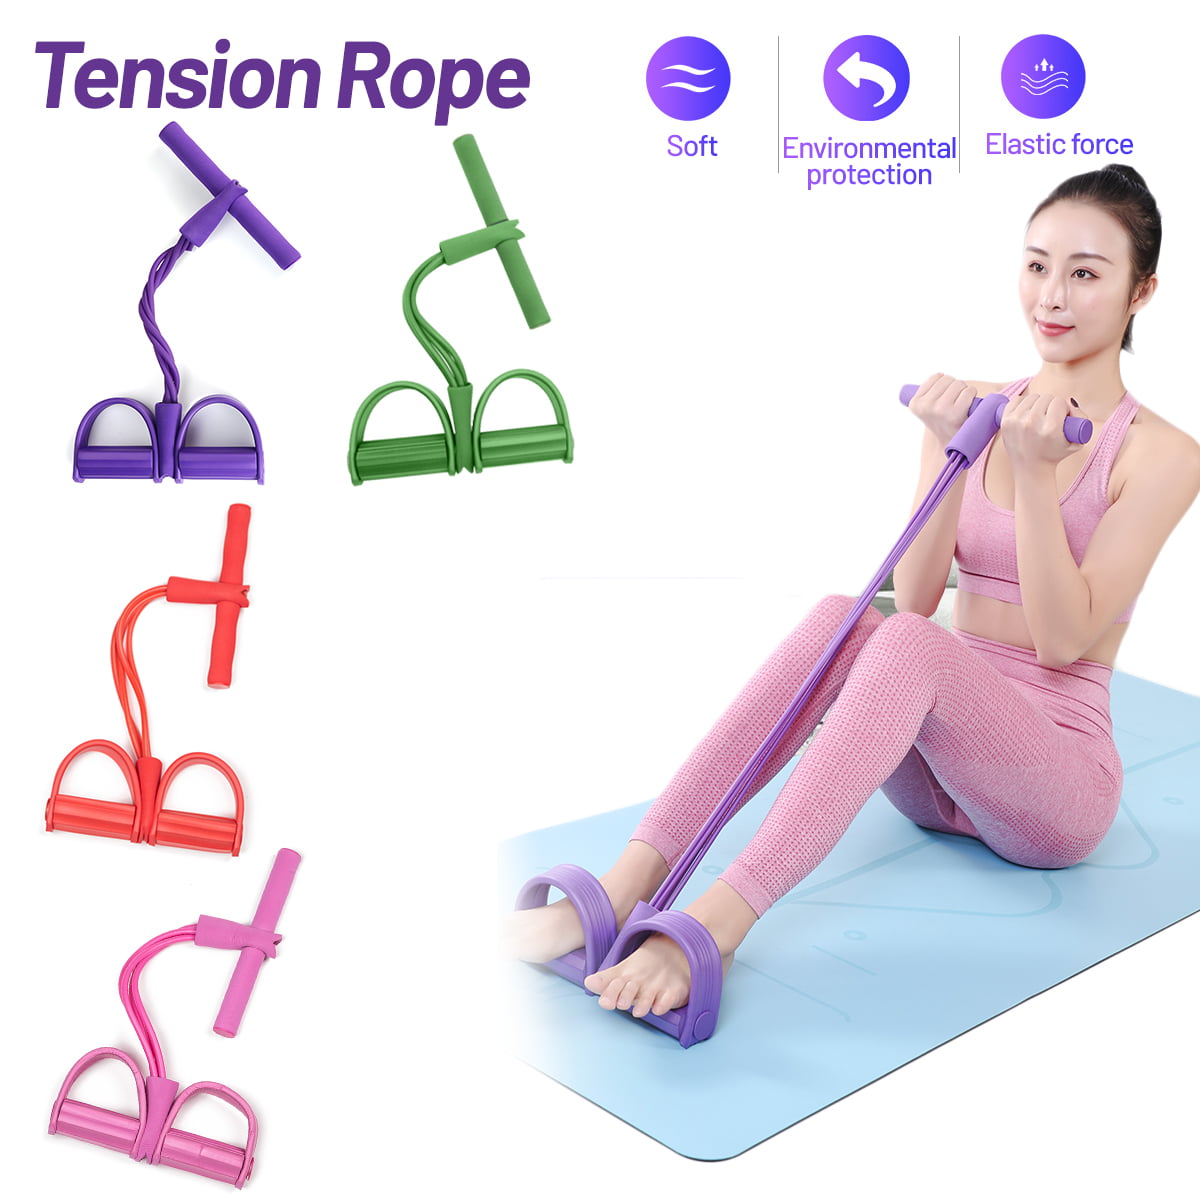 Details about   Fitness Multi-Function Tension Rope Foot Pedal Ropes Ankle Exercise Pull Bands 